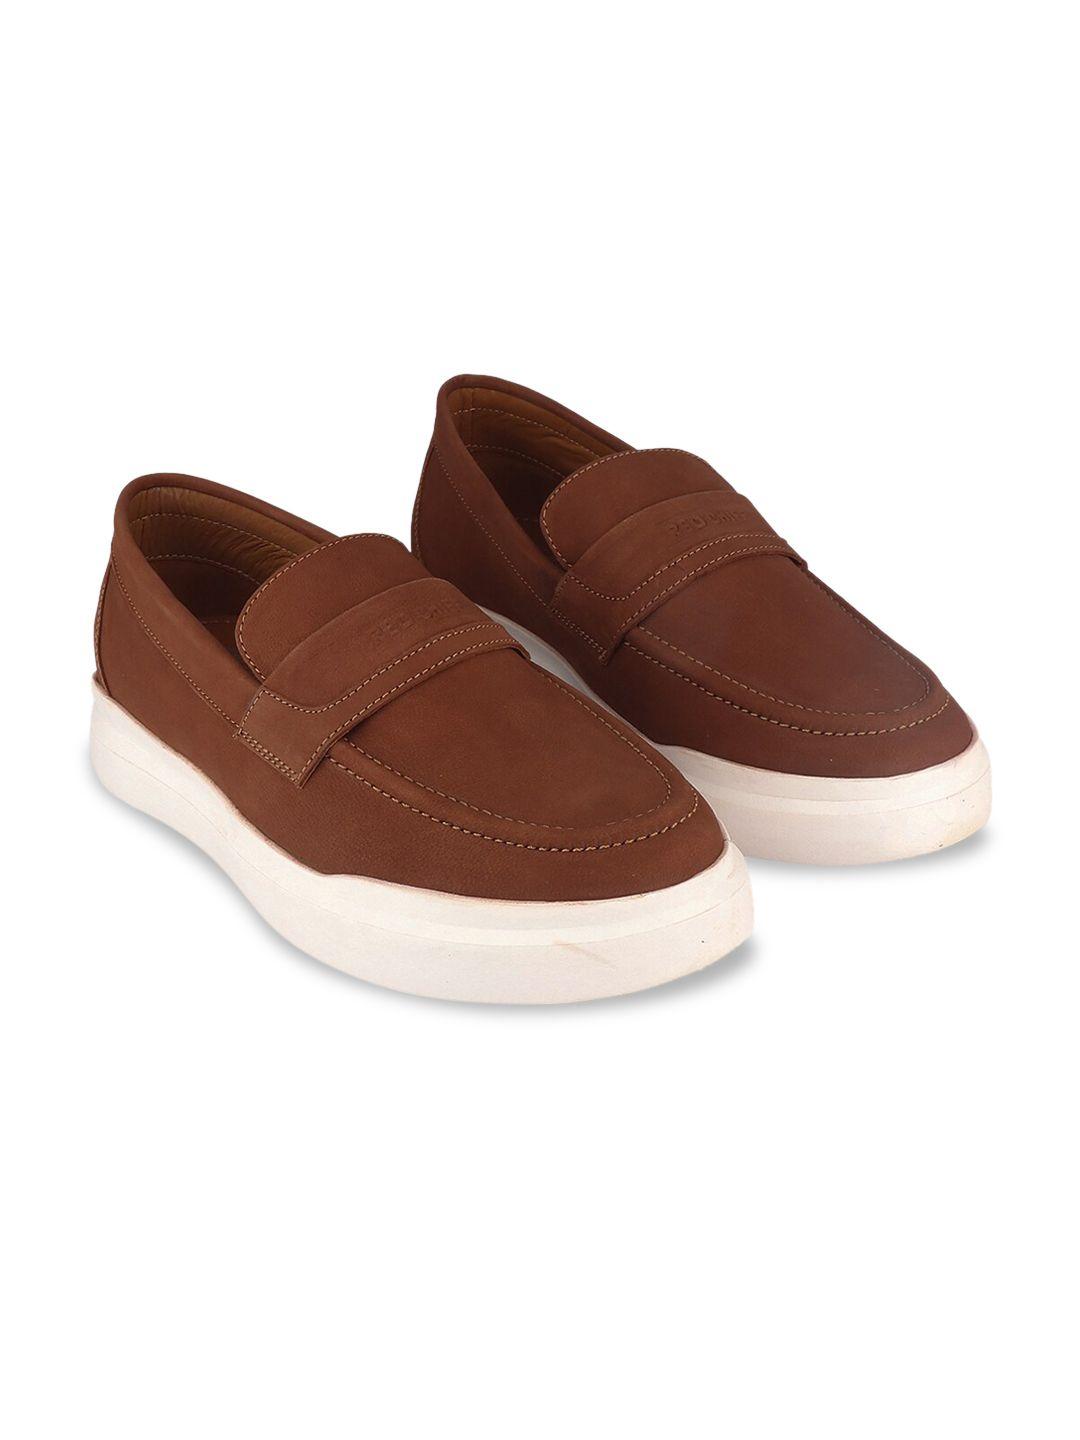 red-chief-men-leather-slip-on-sneakers